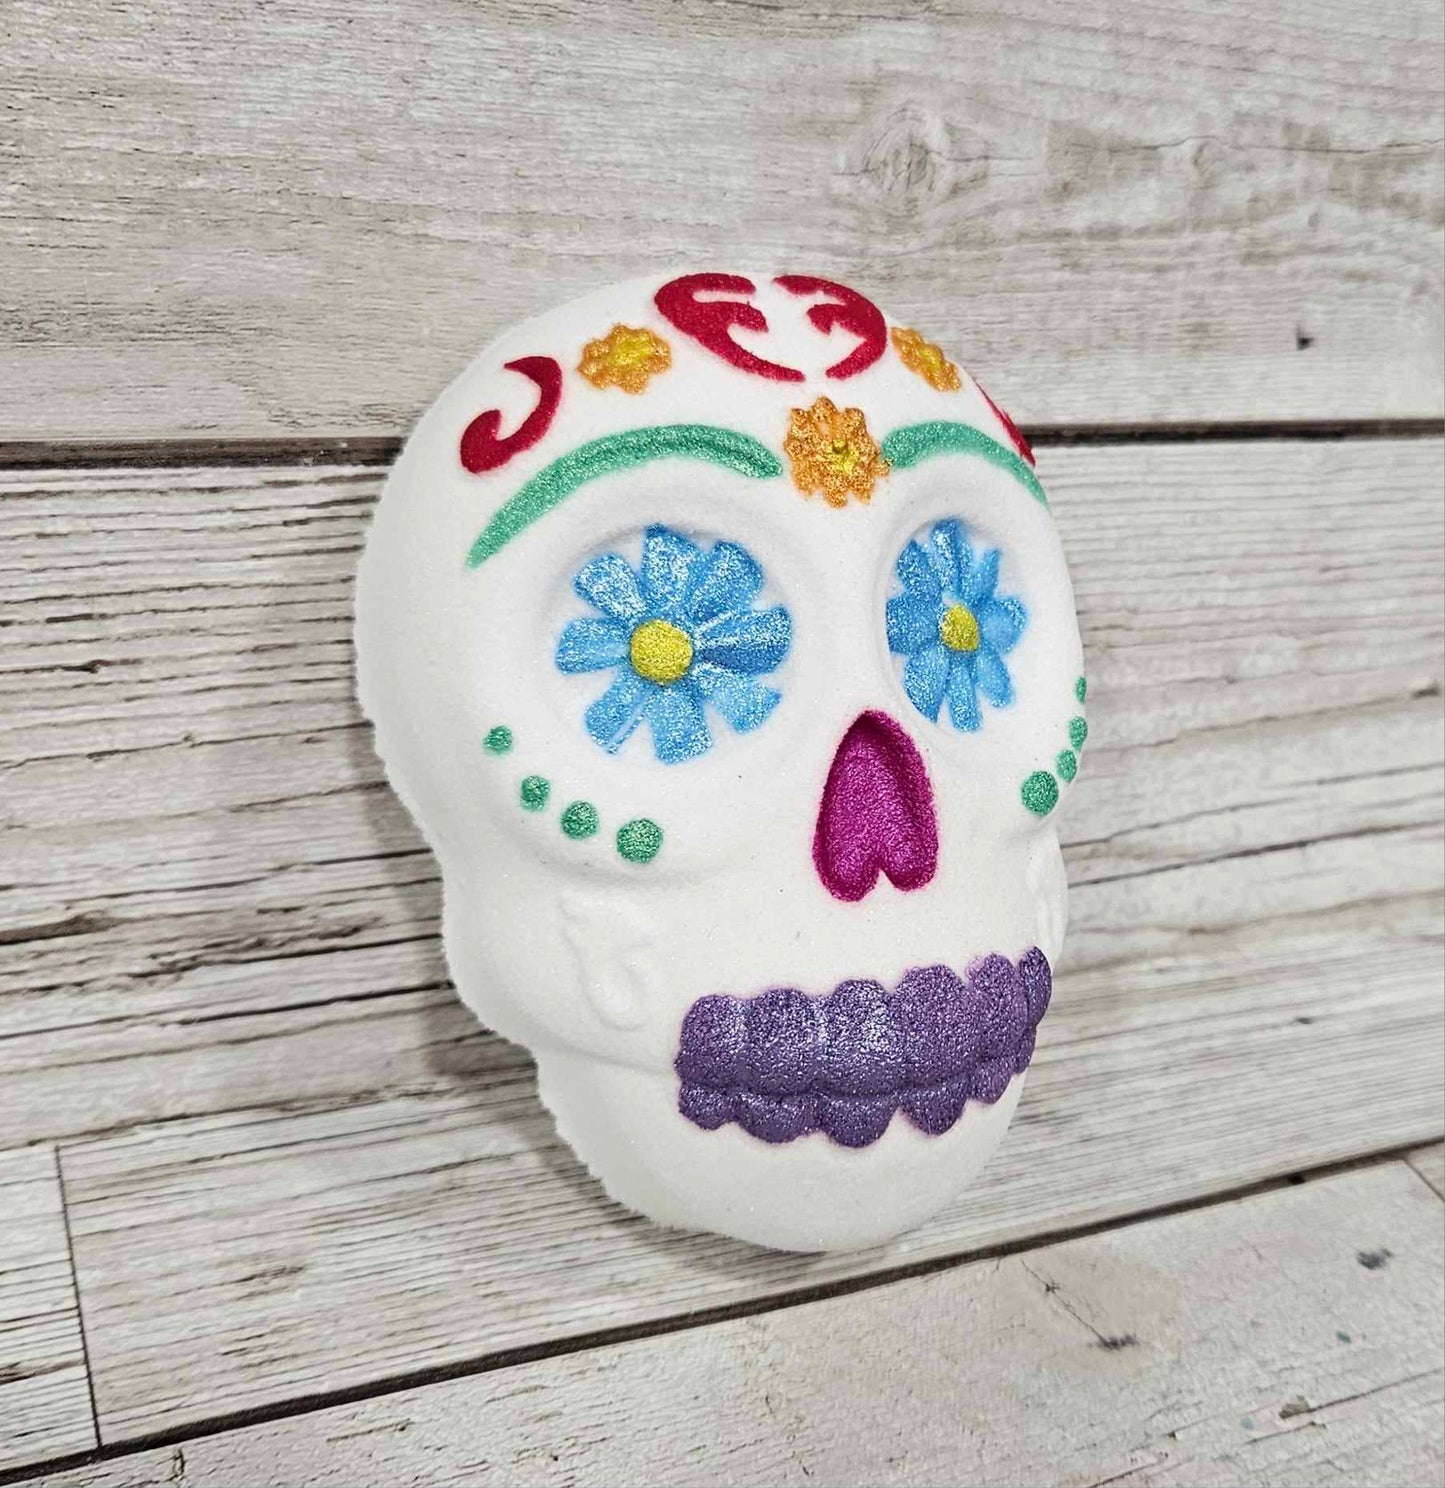 'Day of the Dead' Bath Bomb